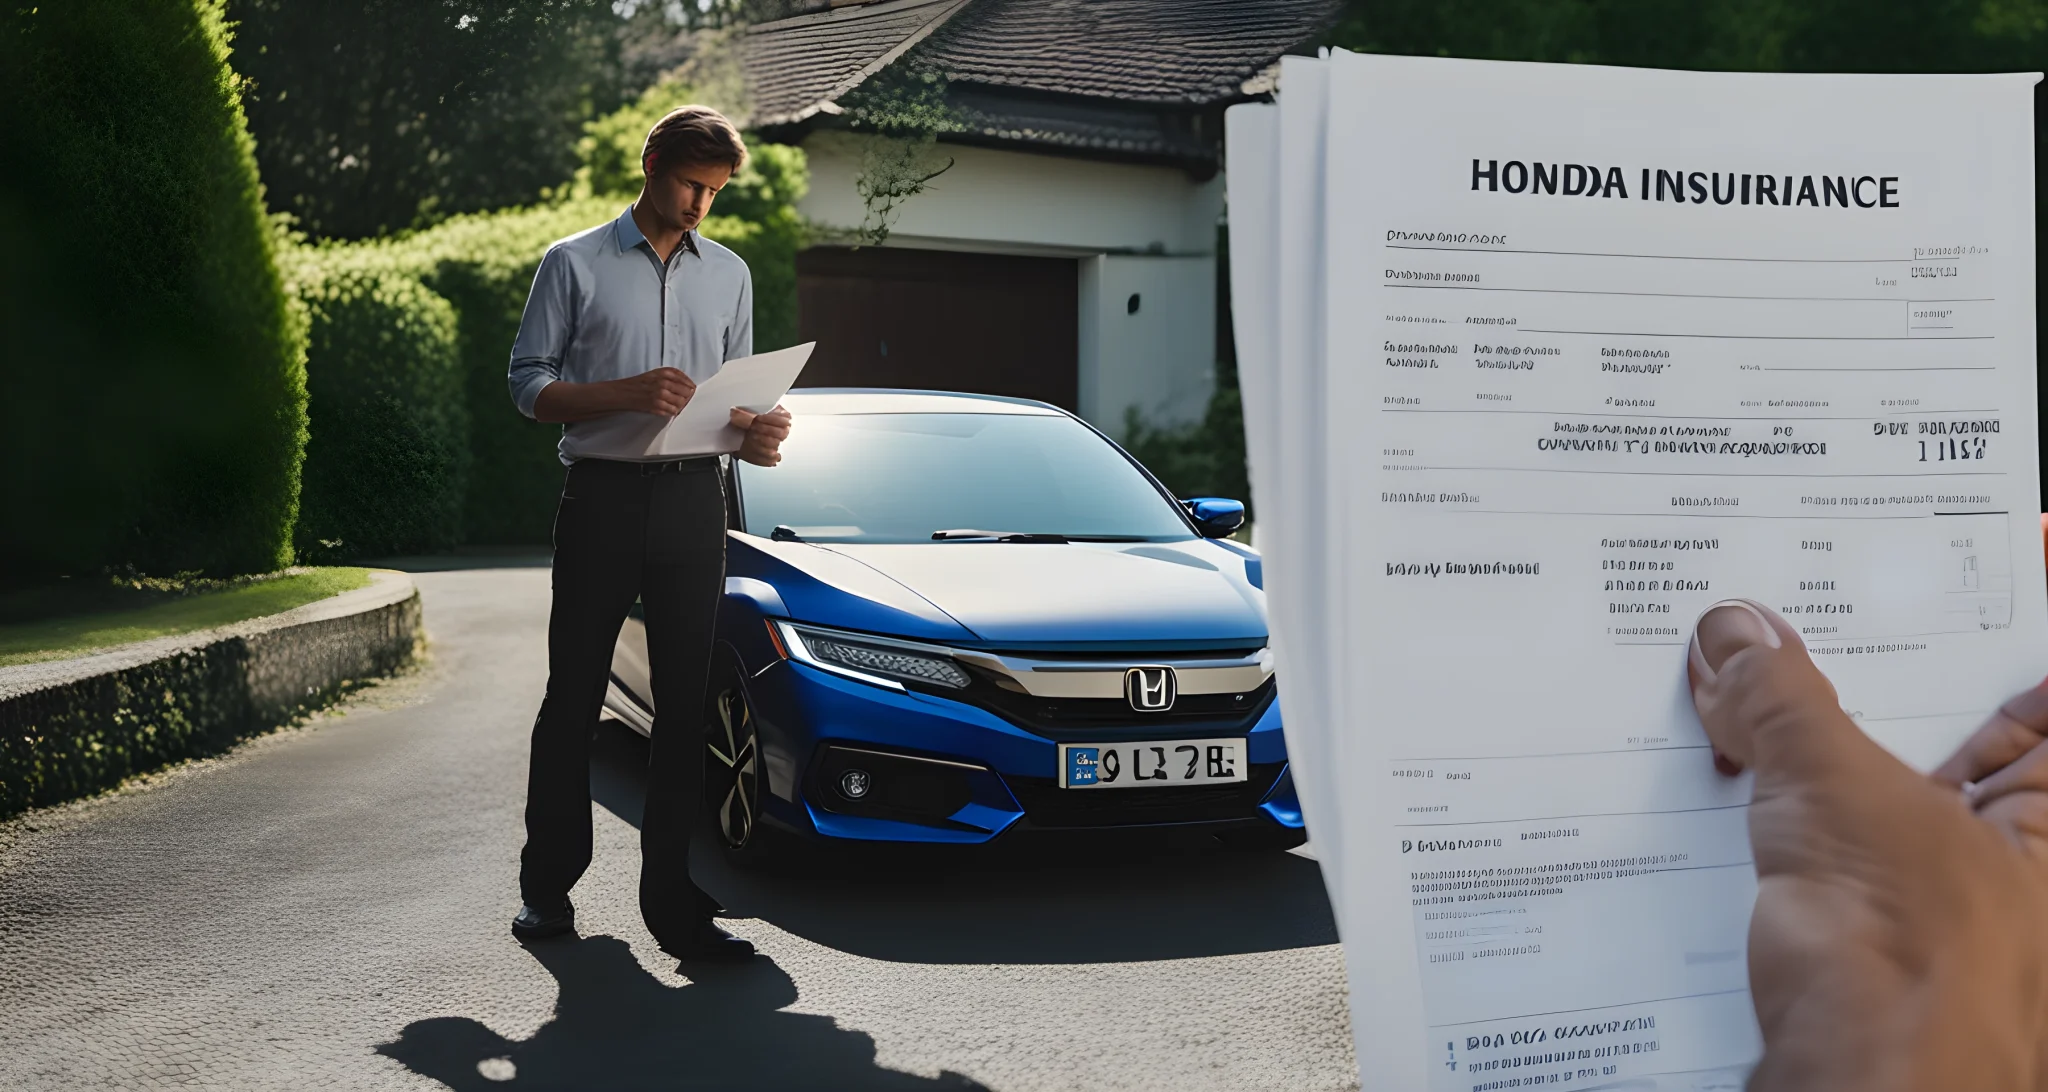 The image shows a Honda car parked in a driveway, with a person holding car insurance paperwork next to it.